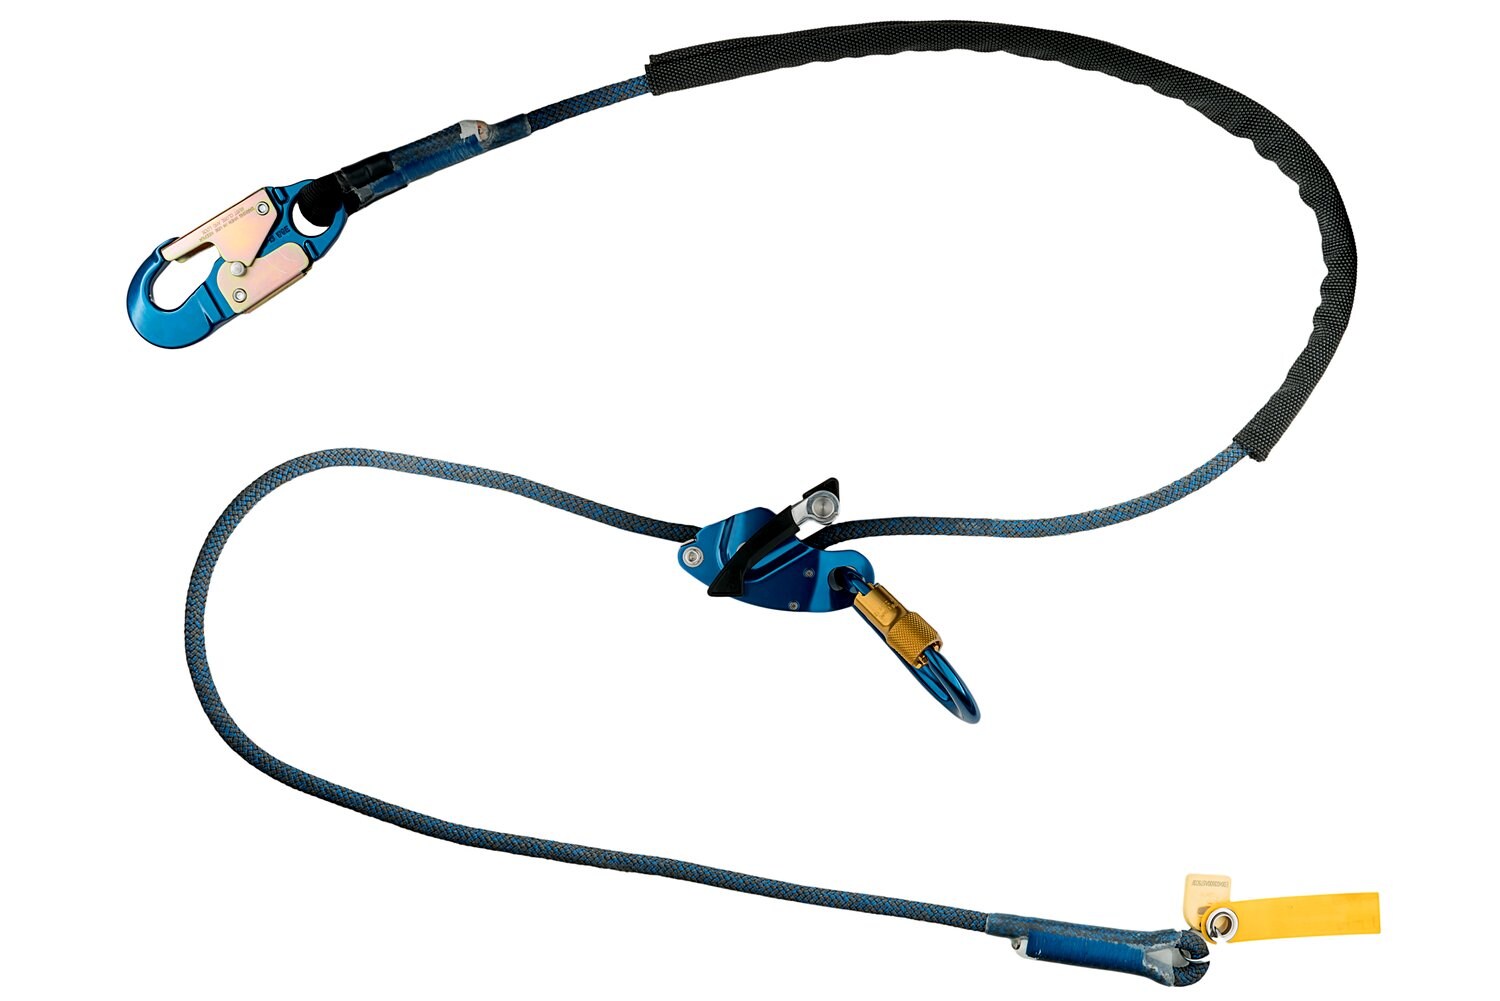 7012817101 - 3M DBI-SALA Trigger X Tie-Back Adjustable Single/Double Mode Rope Positioning Lanyard 1234091, 1/2 in Aramid Kernmantle, 6 ft